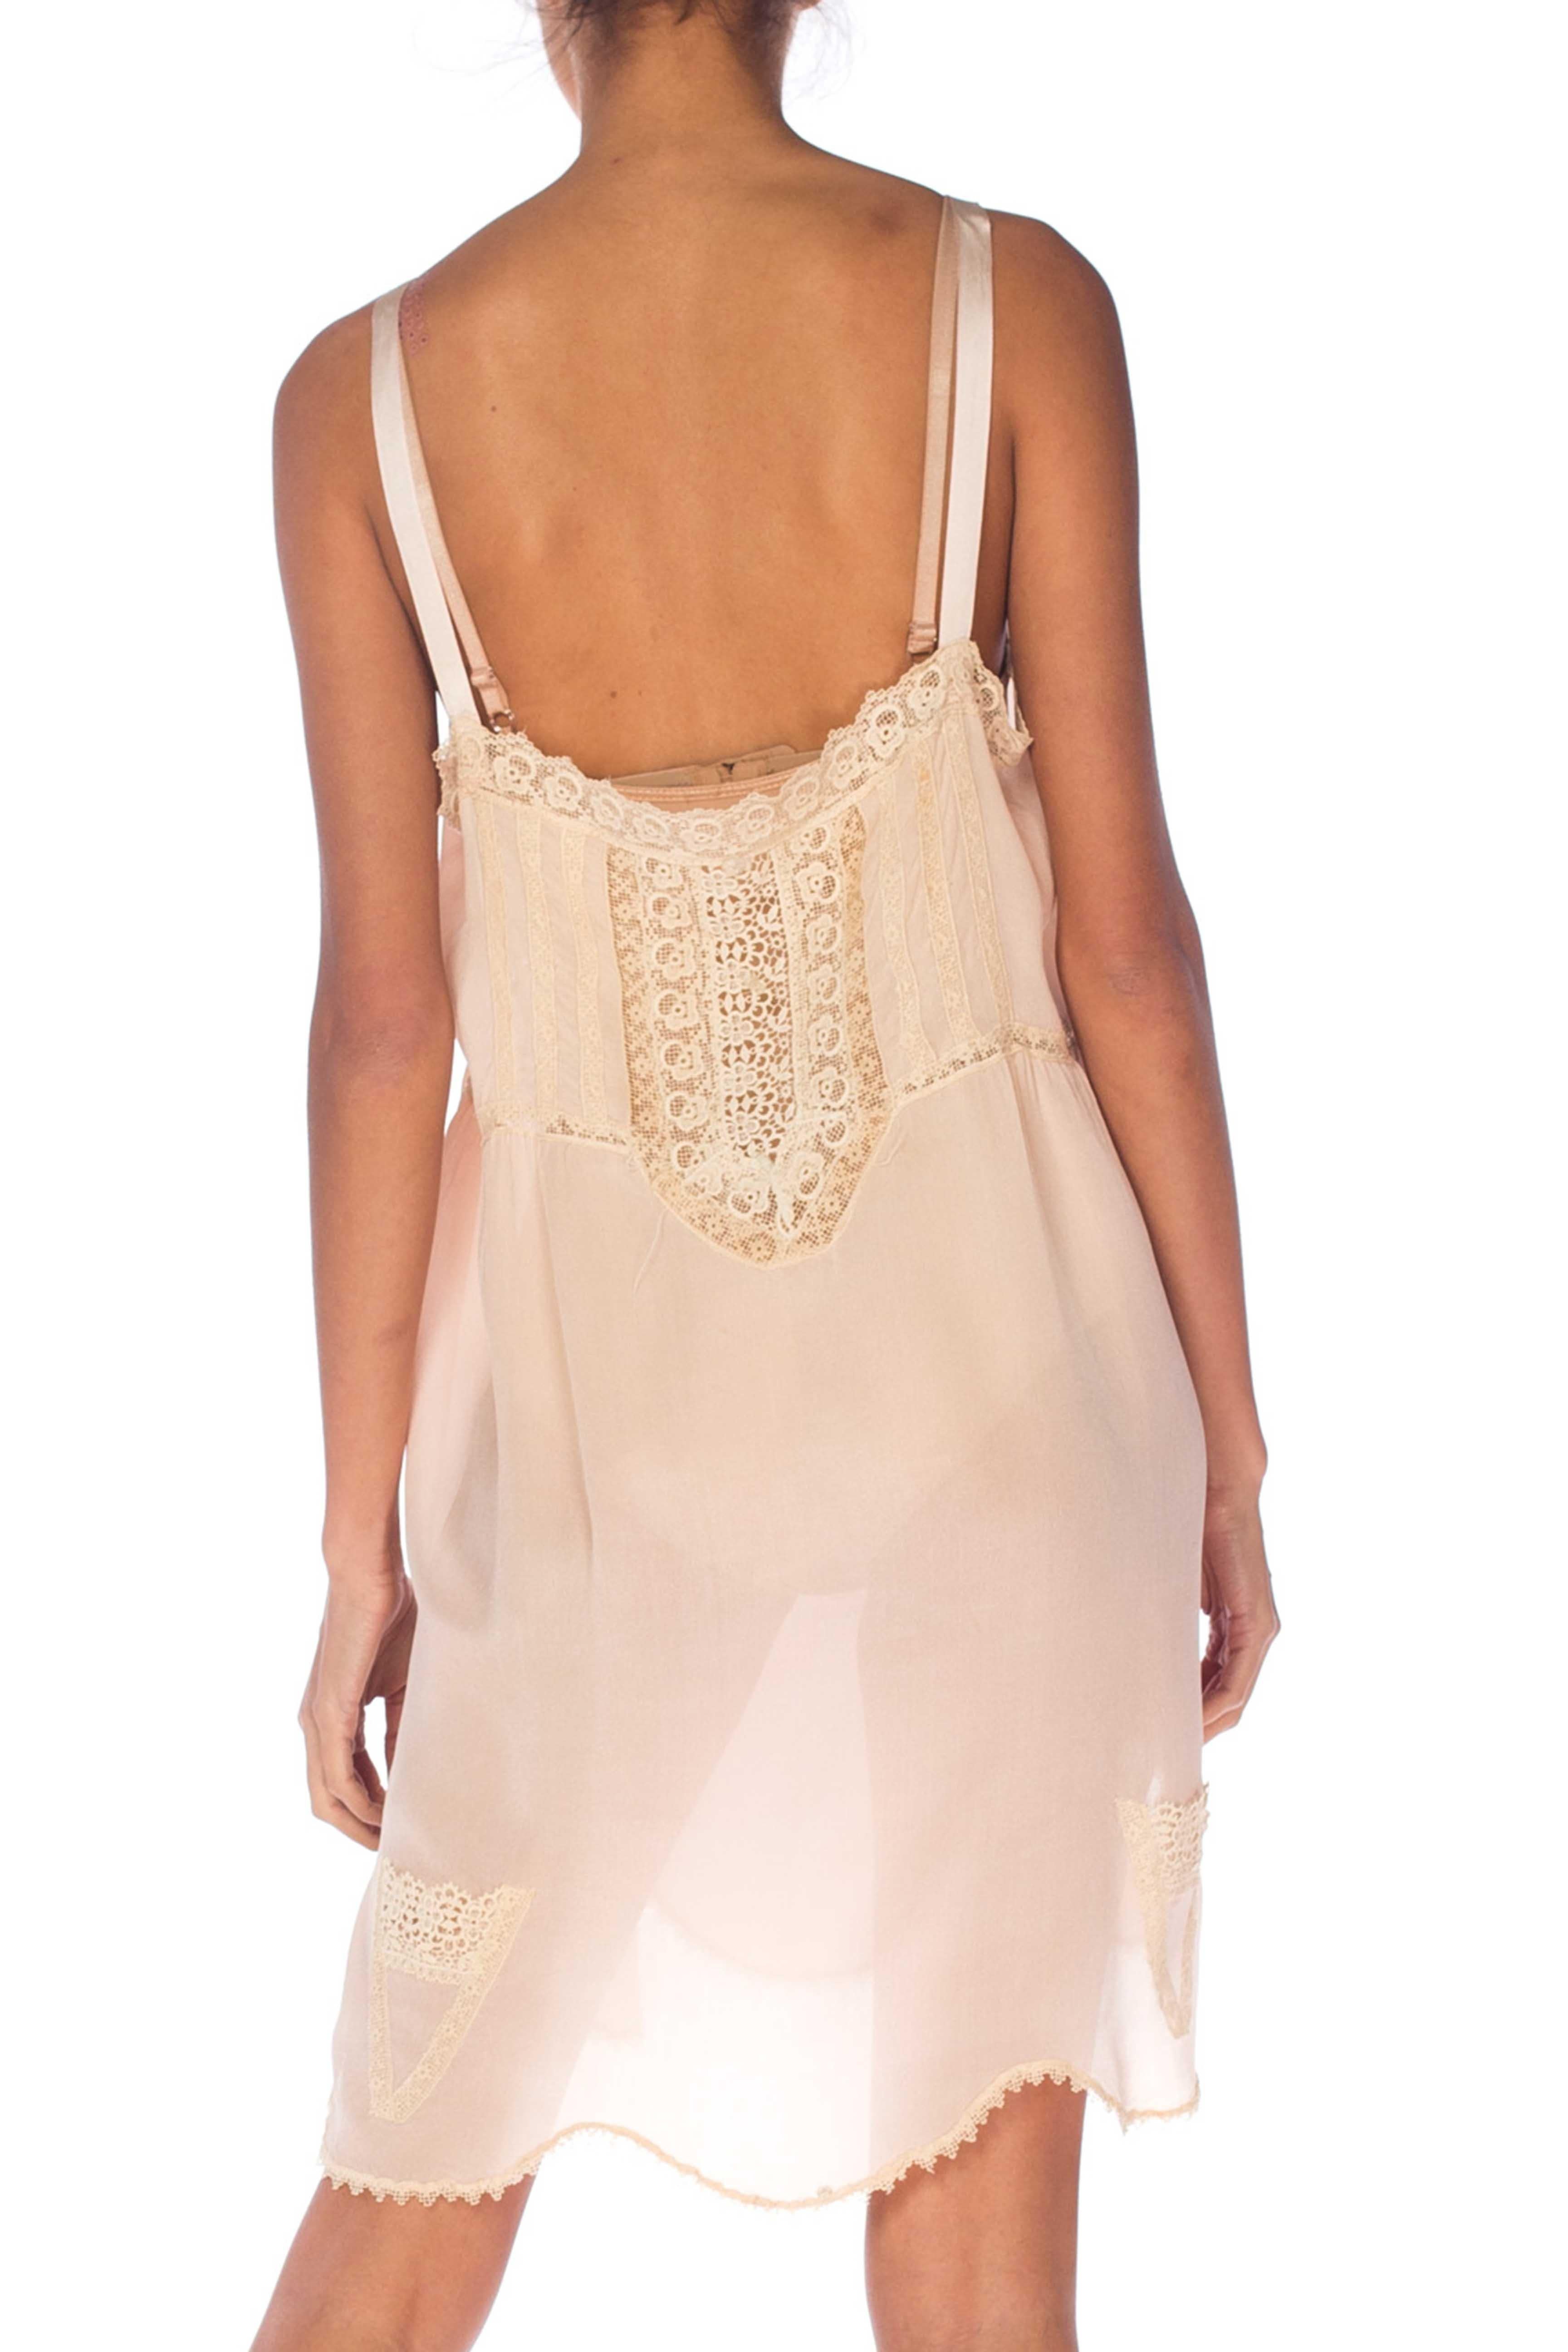 1920S Blush Pink Silk Crepe De Chine Lace Trimmed Negligee Slip Dress For Sale 3